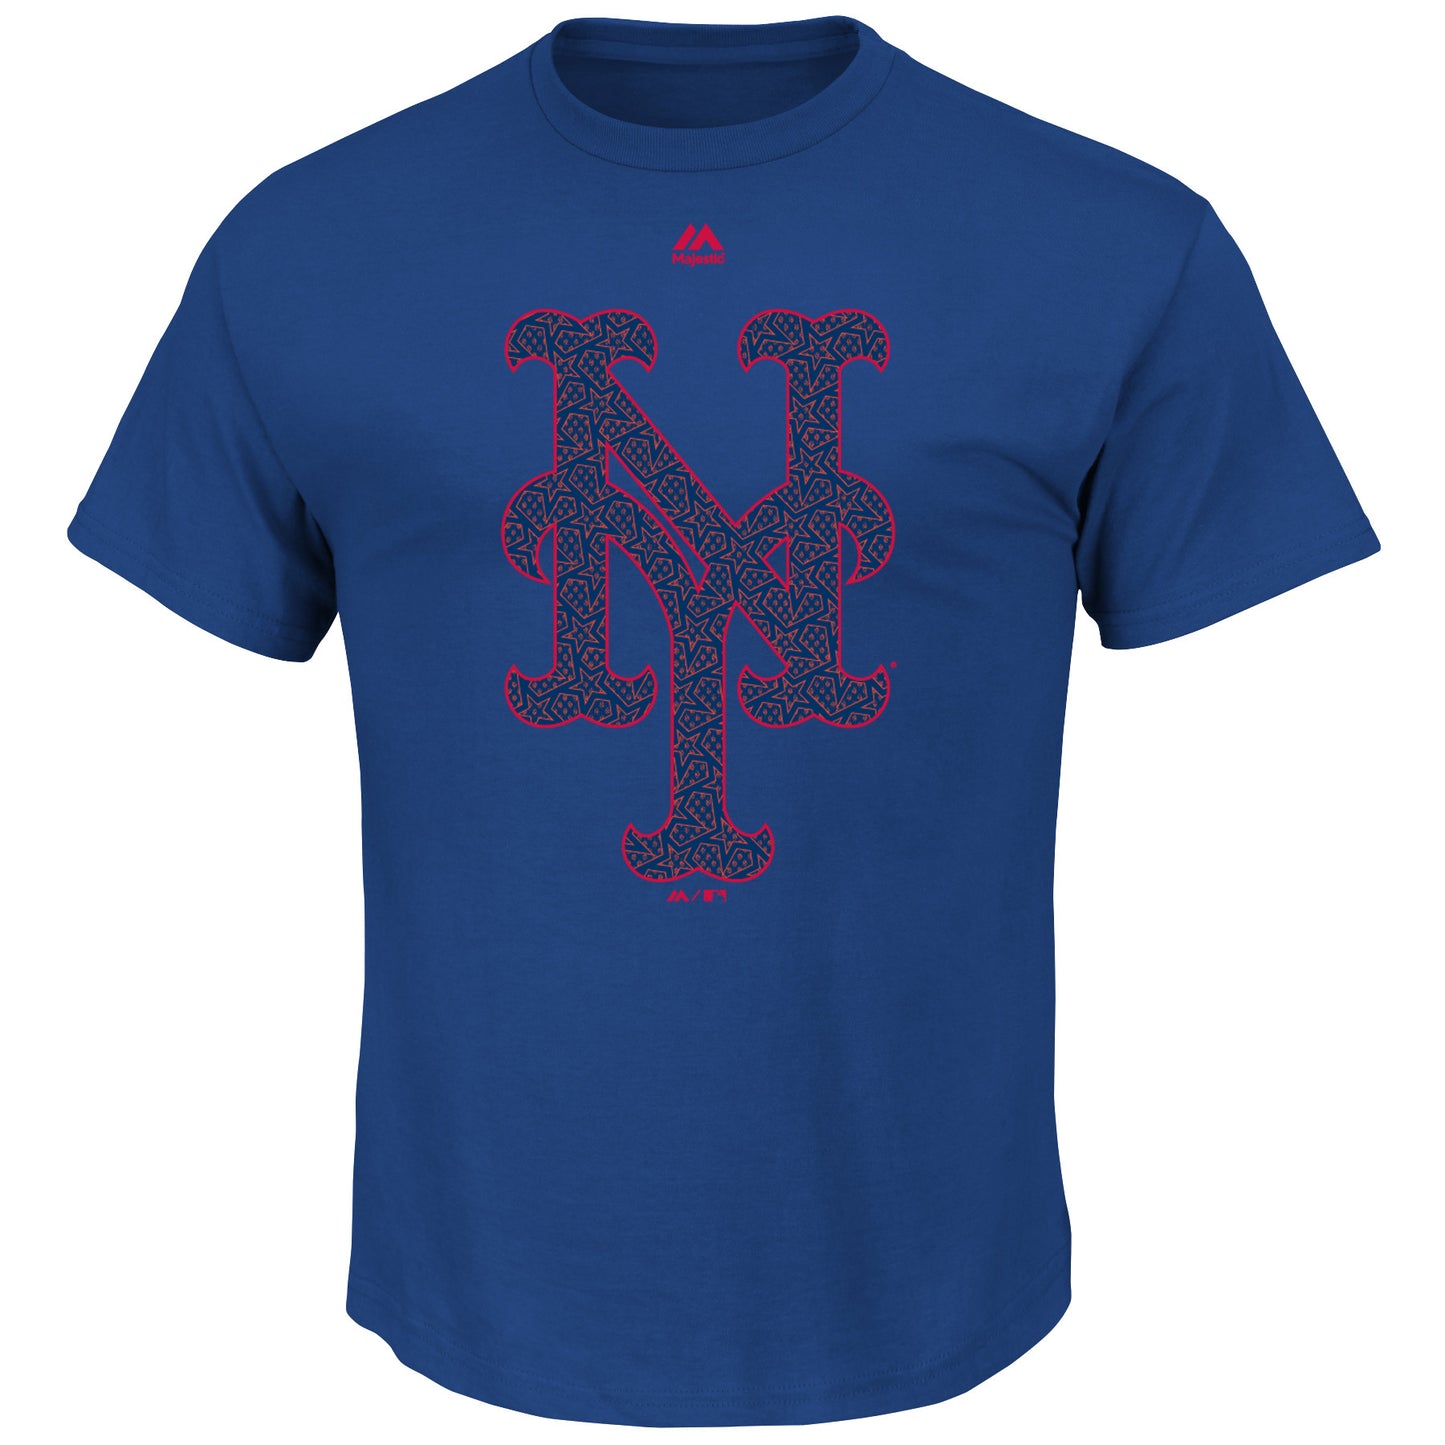 New York Mets Stars and Stripes July 4th Tee Shirt - Blue